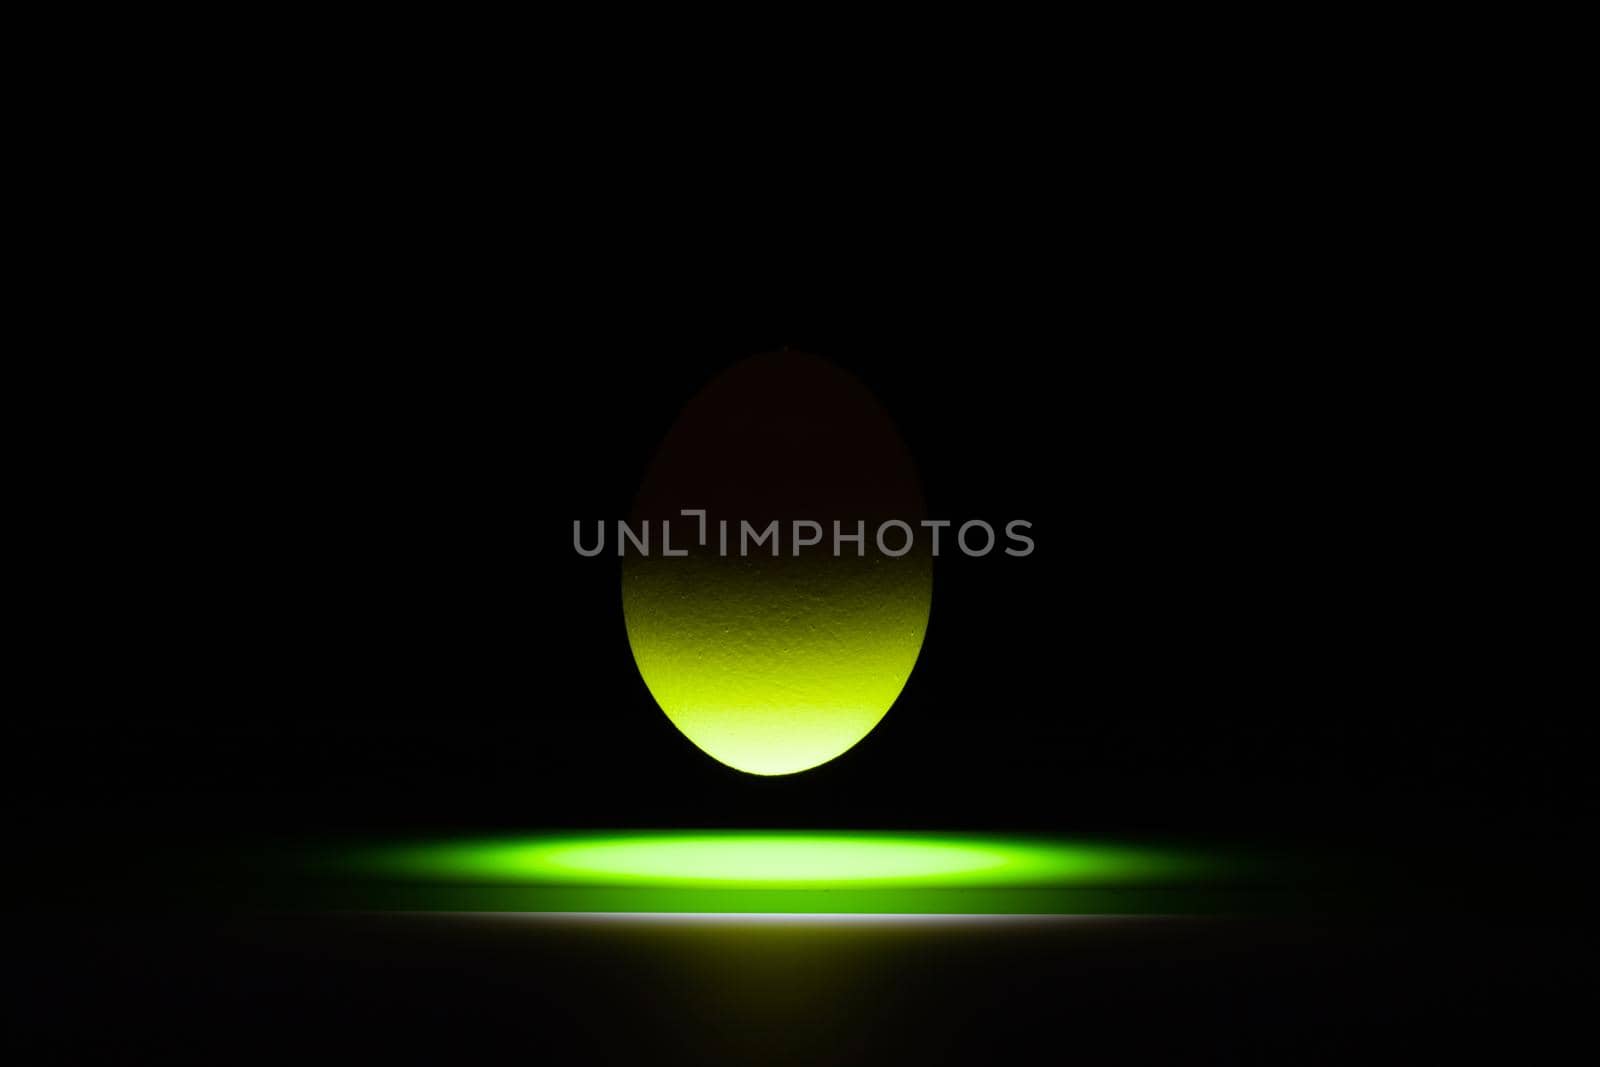 Green egg levitating over a black glass table in the dark room.